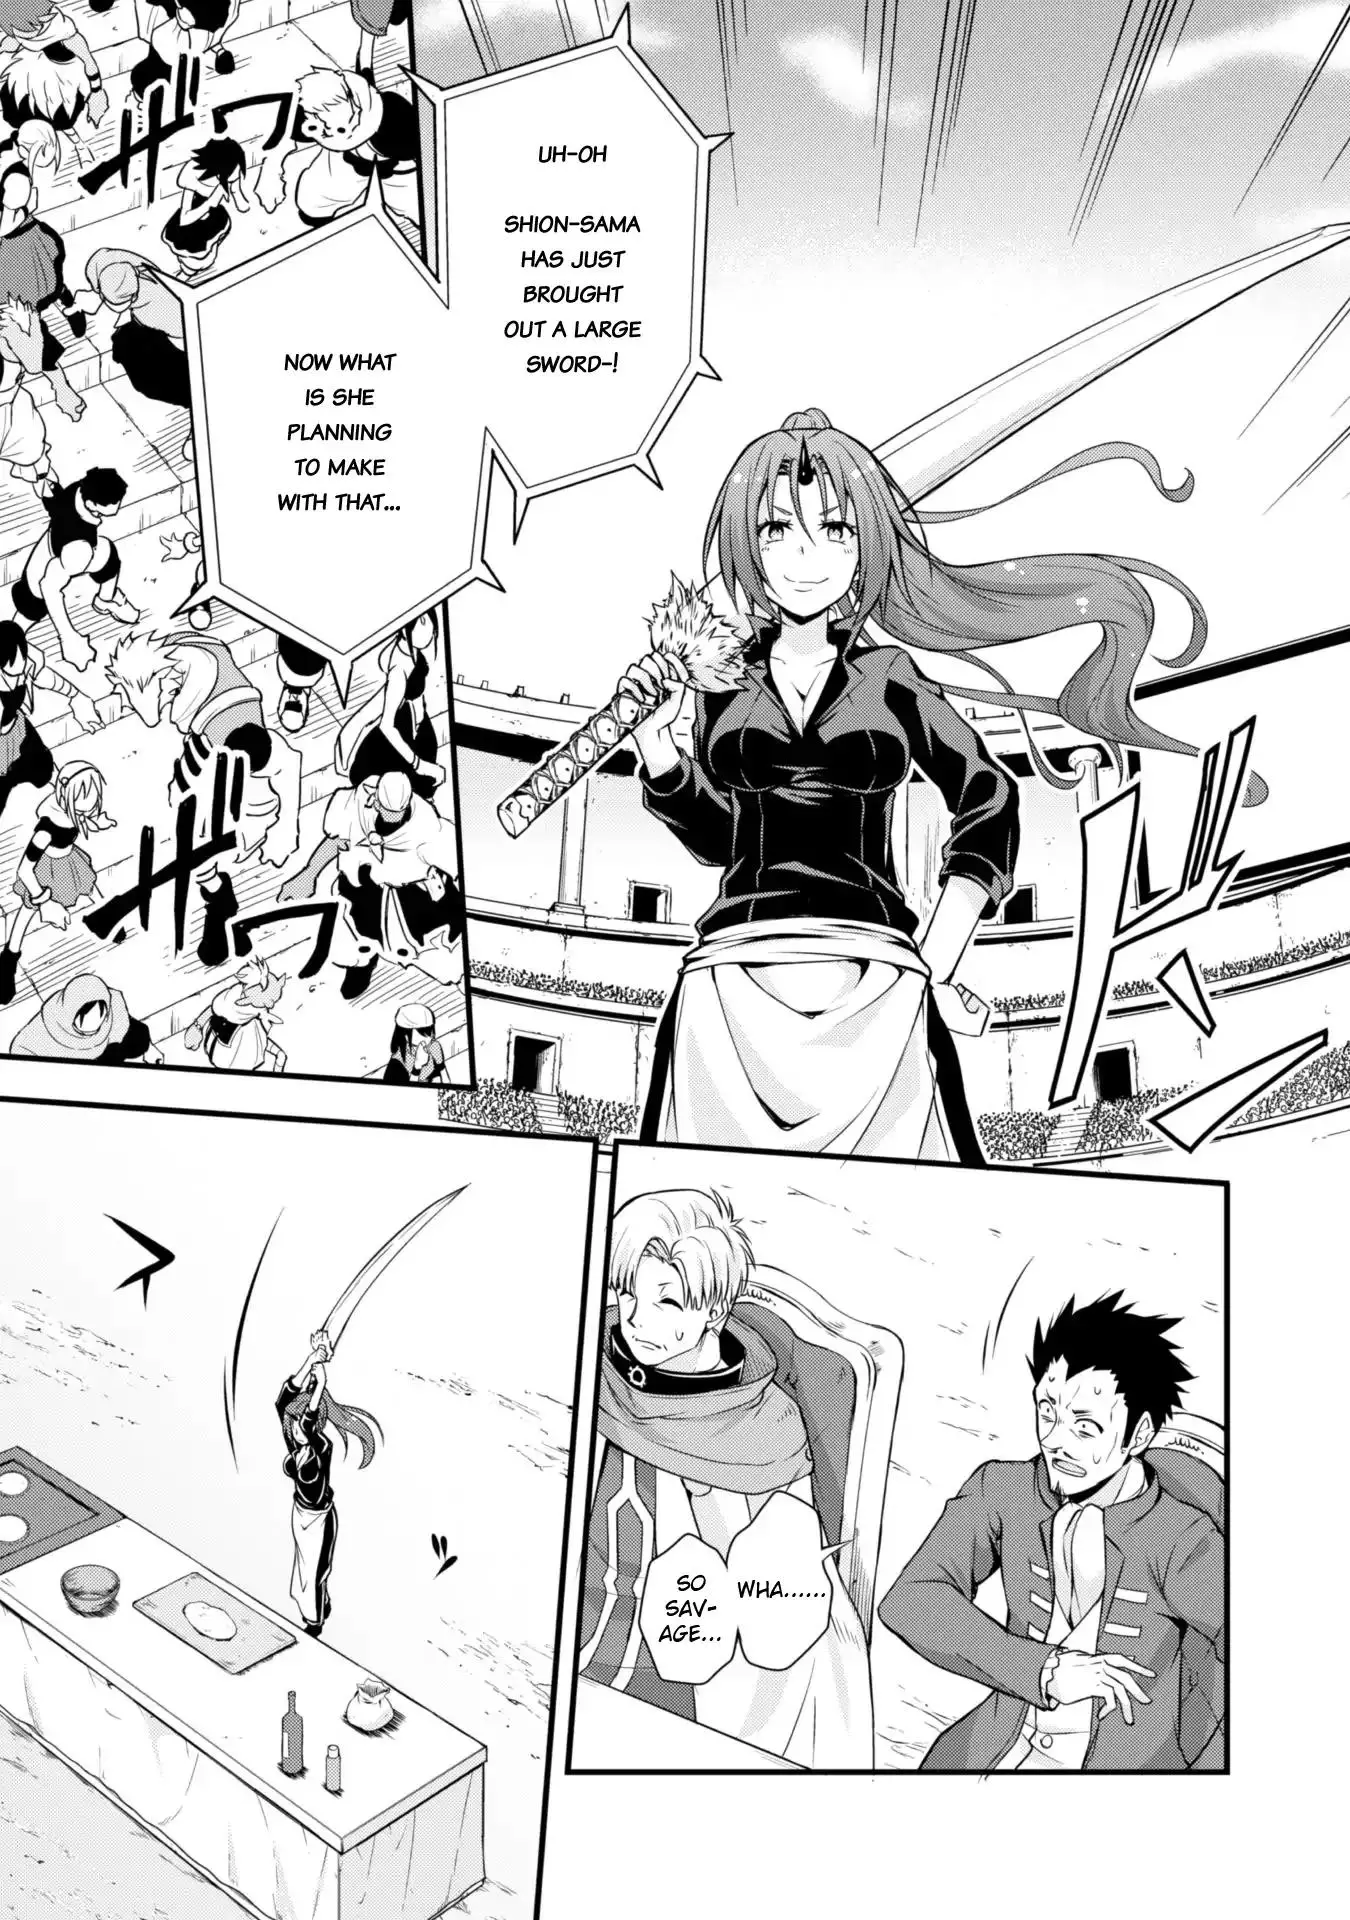 Tensei Shitara Slime Datta Ken: The Ways of Strolling in the Demon Country - 17 page 6